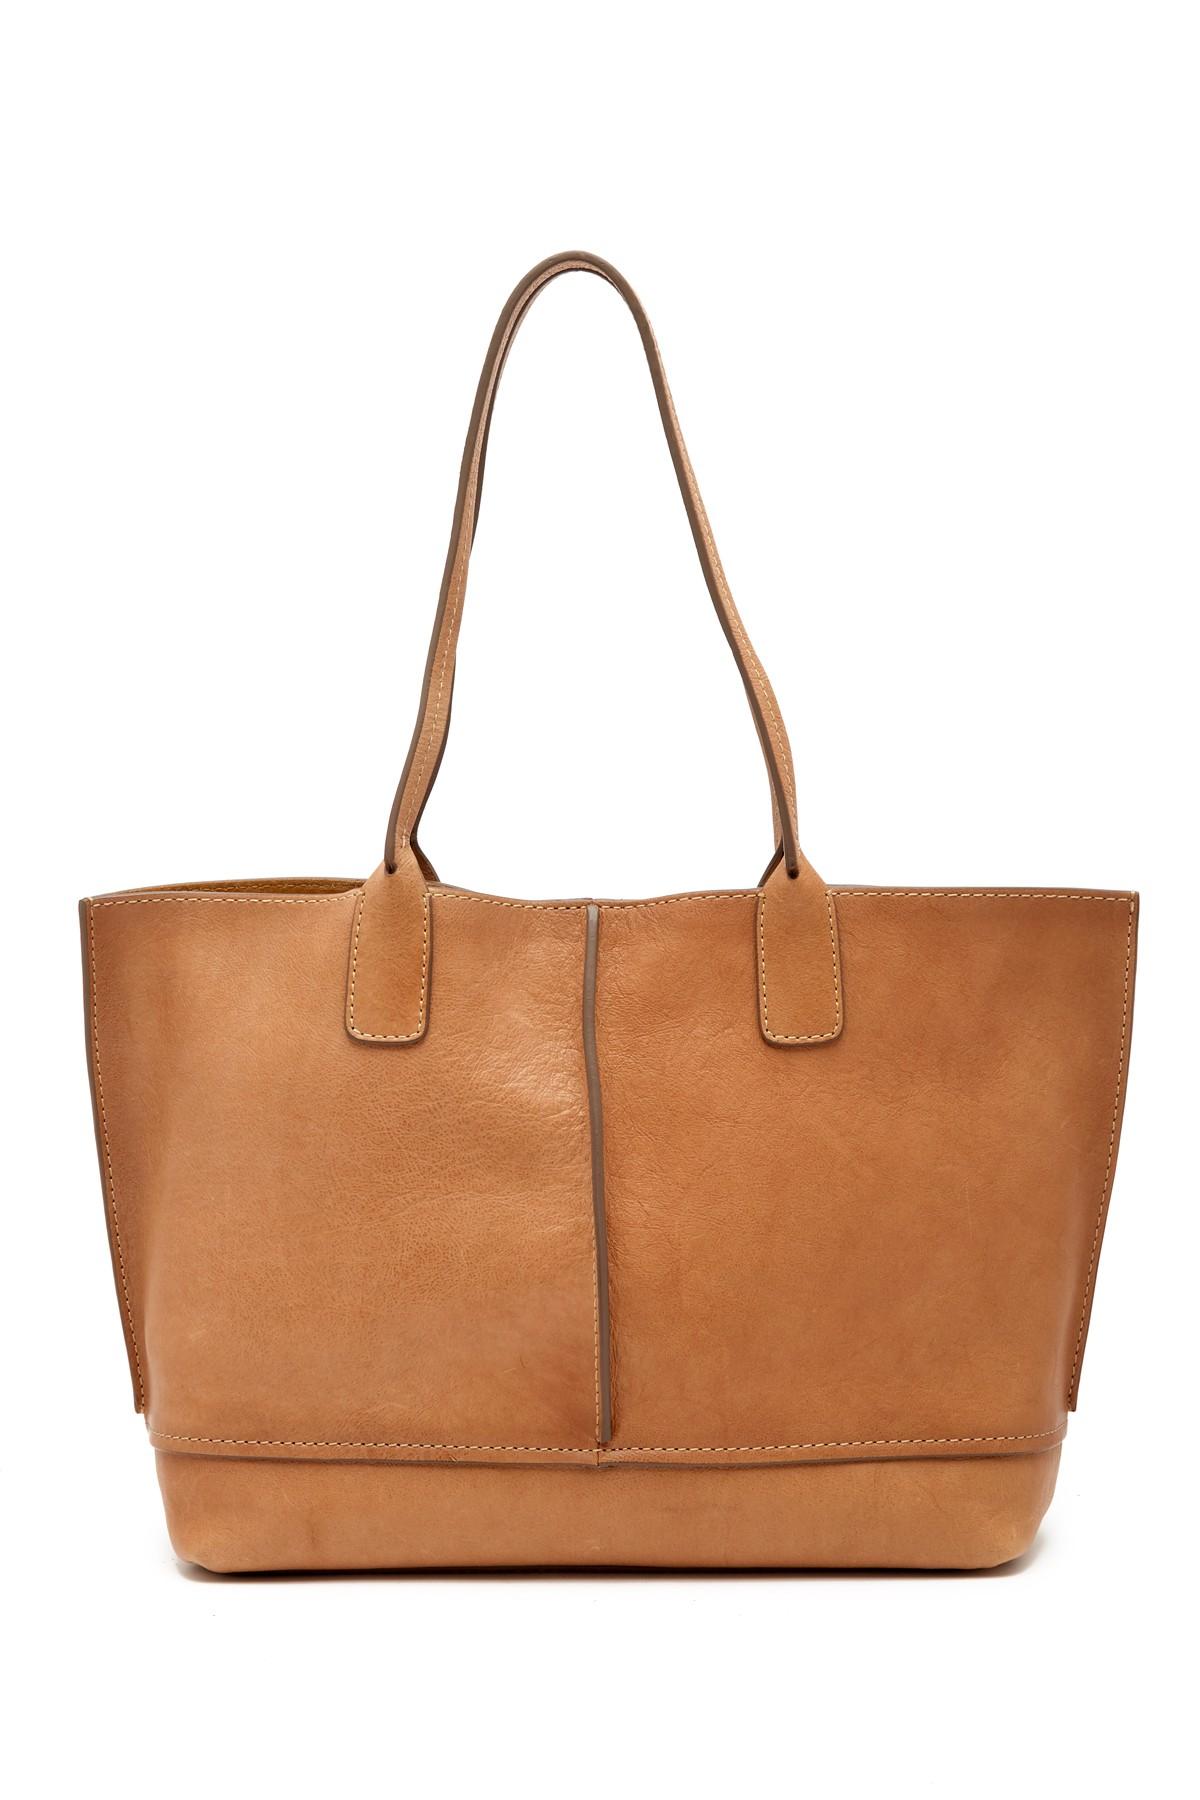 Frye Lucy Leather Tote Bag in Beige (Natural) - Lyst